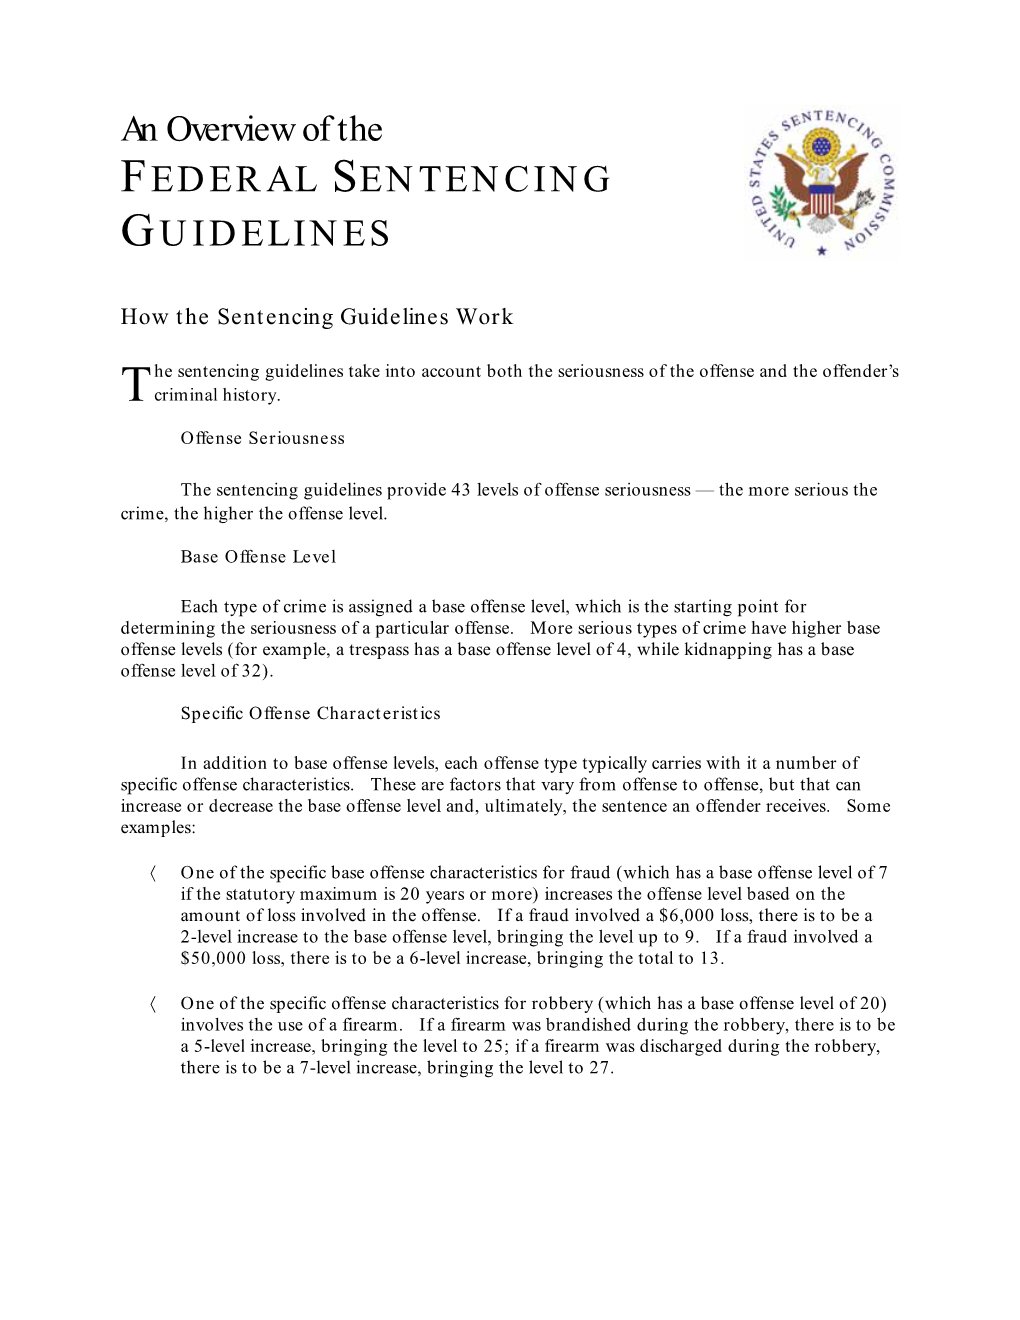 An Overview of the Federal Sentencing Guidelines